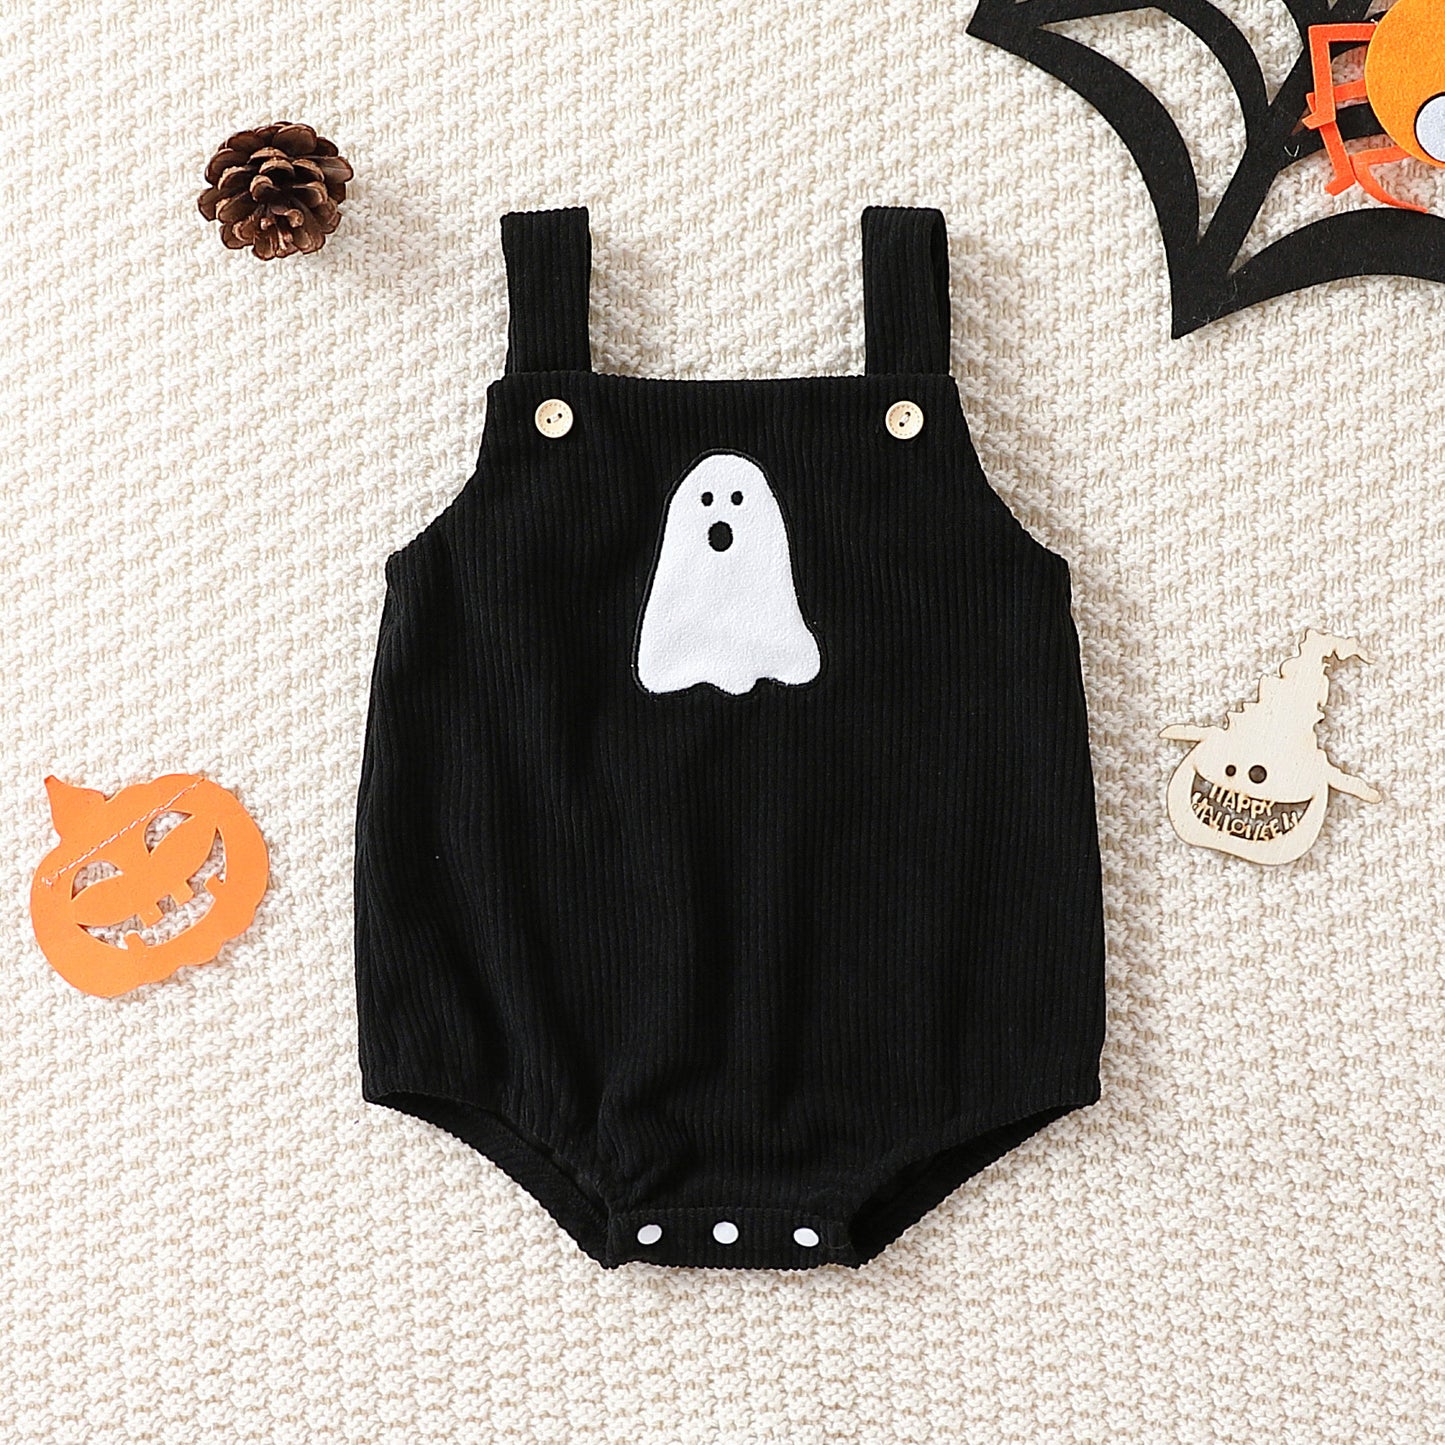 Infant Baby Girl Corduroy Halloween Embroidered Slip Top Triangle Rompers